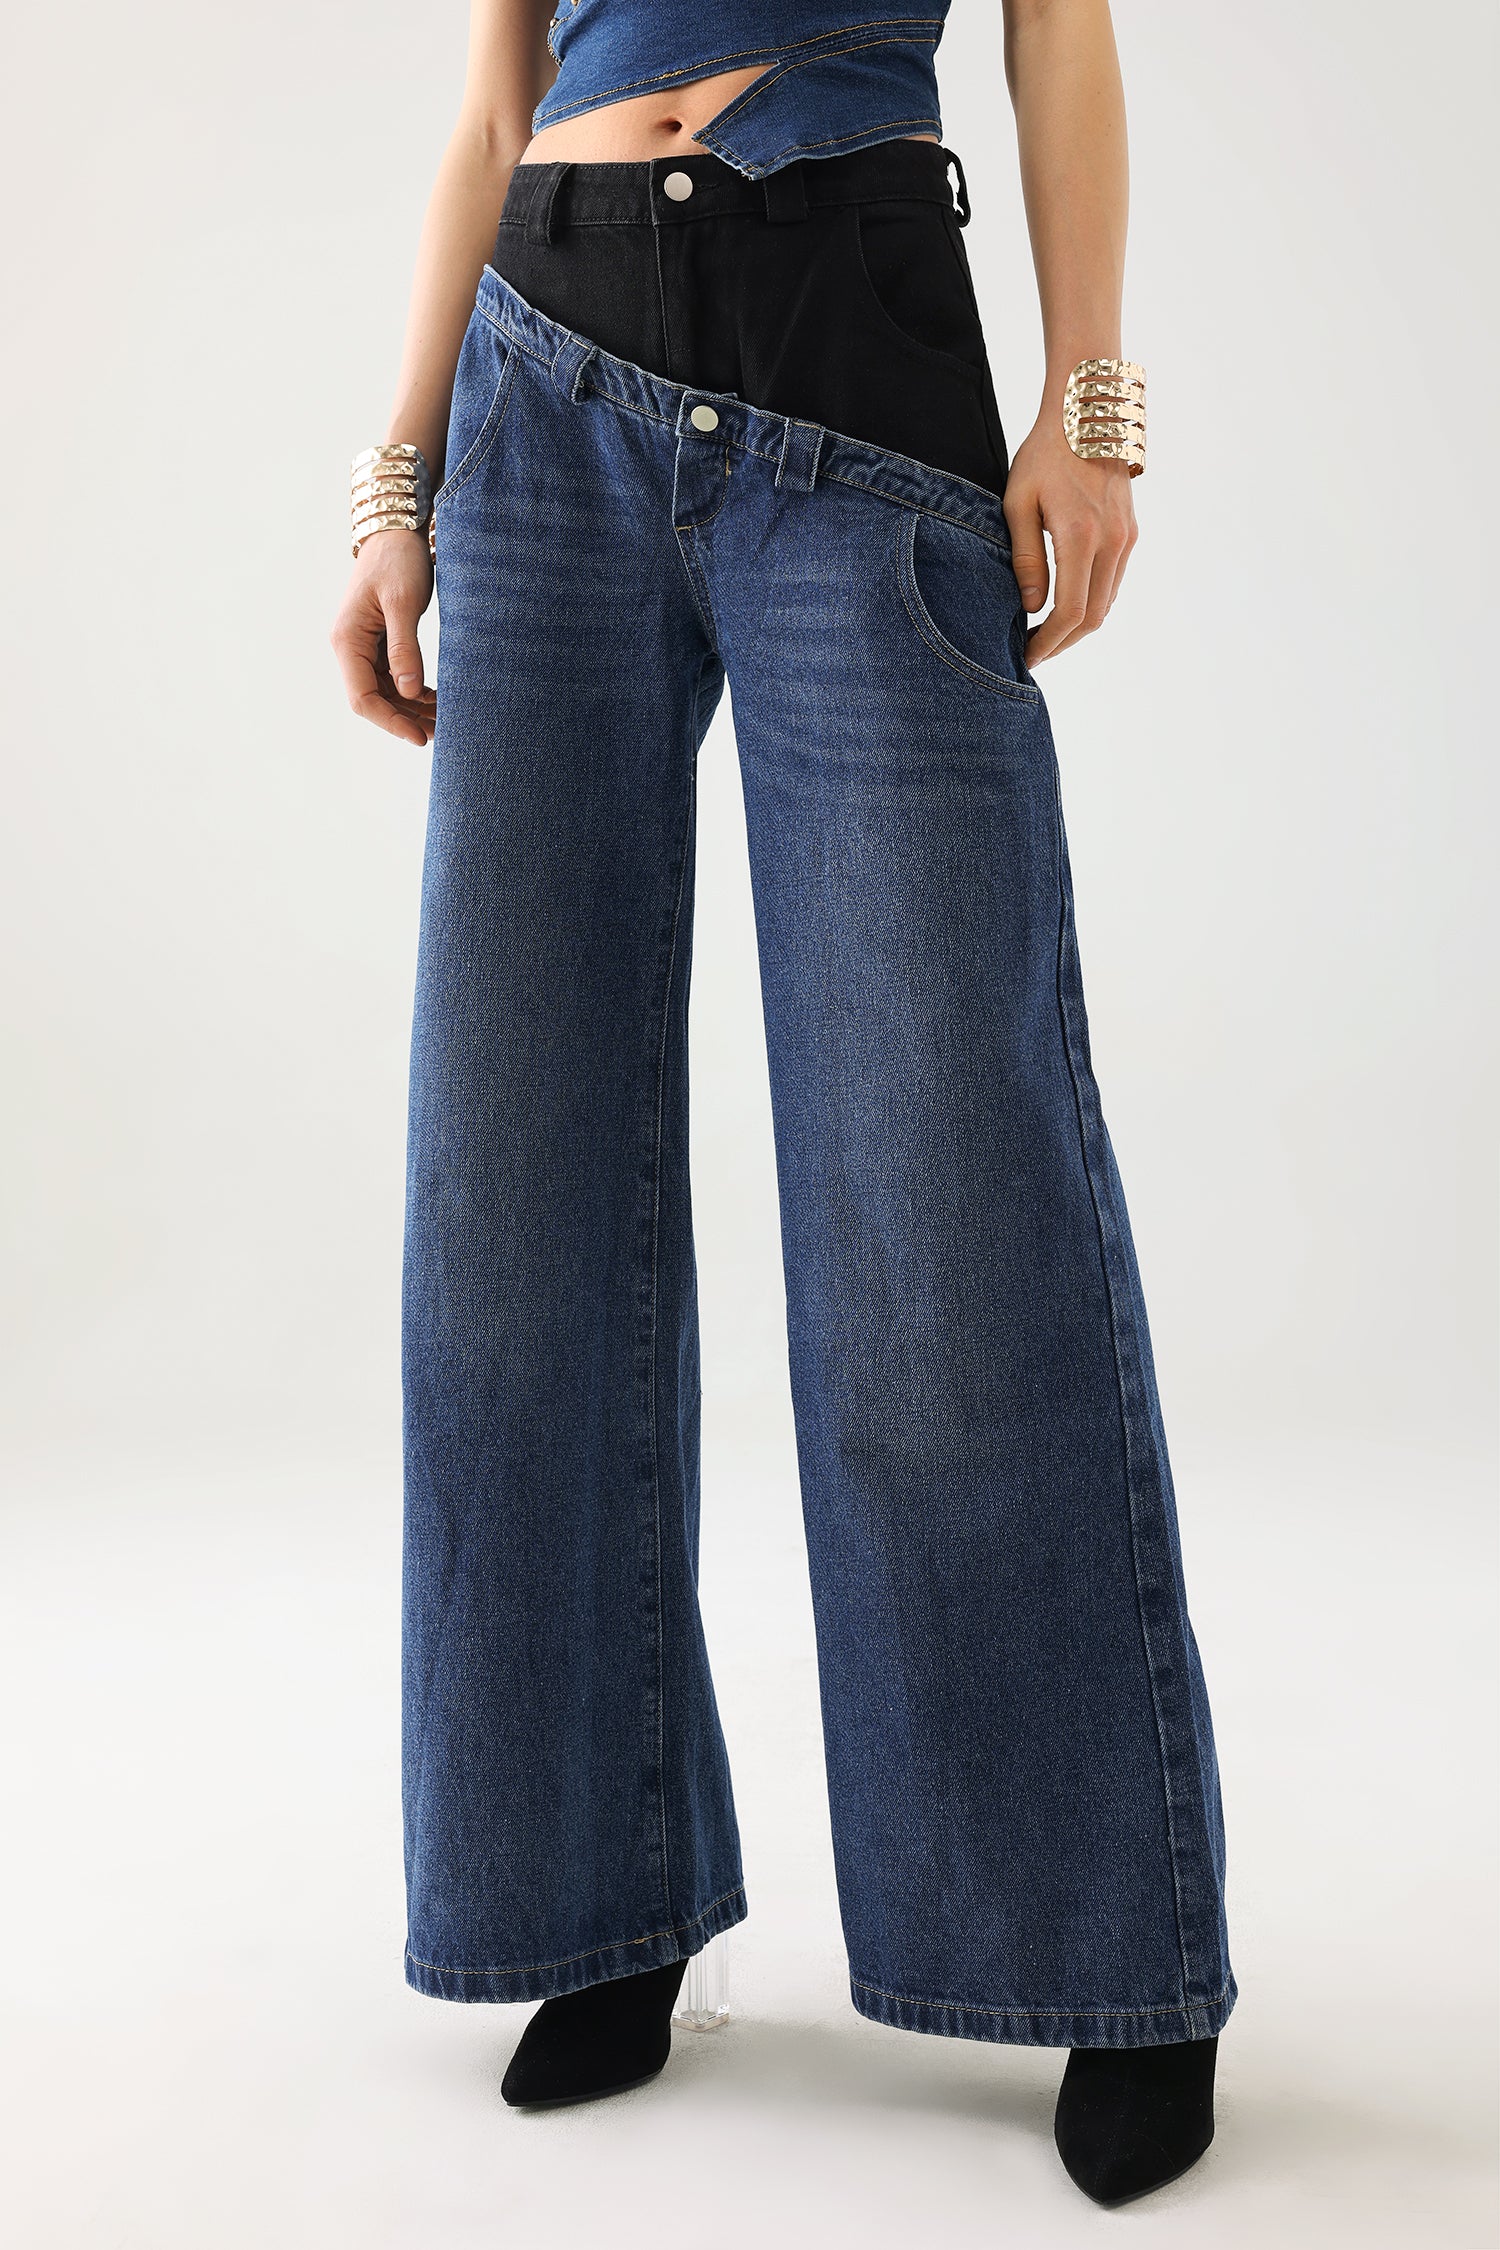 Tabitha Patchwork Jeans